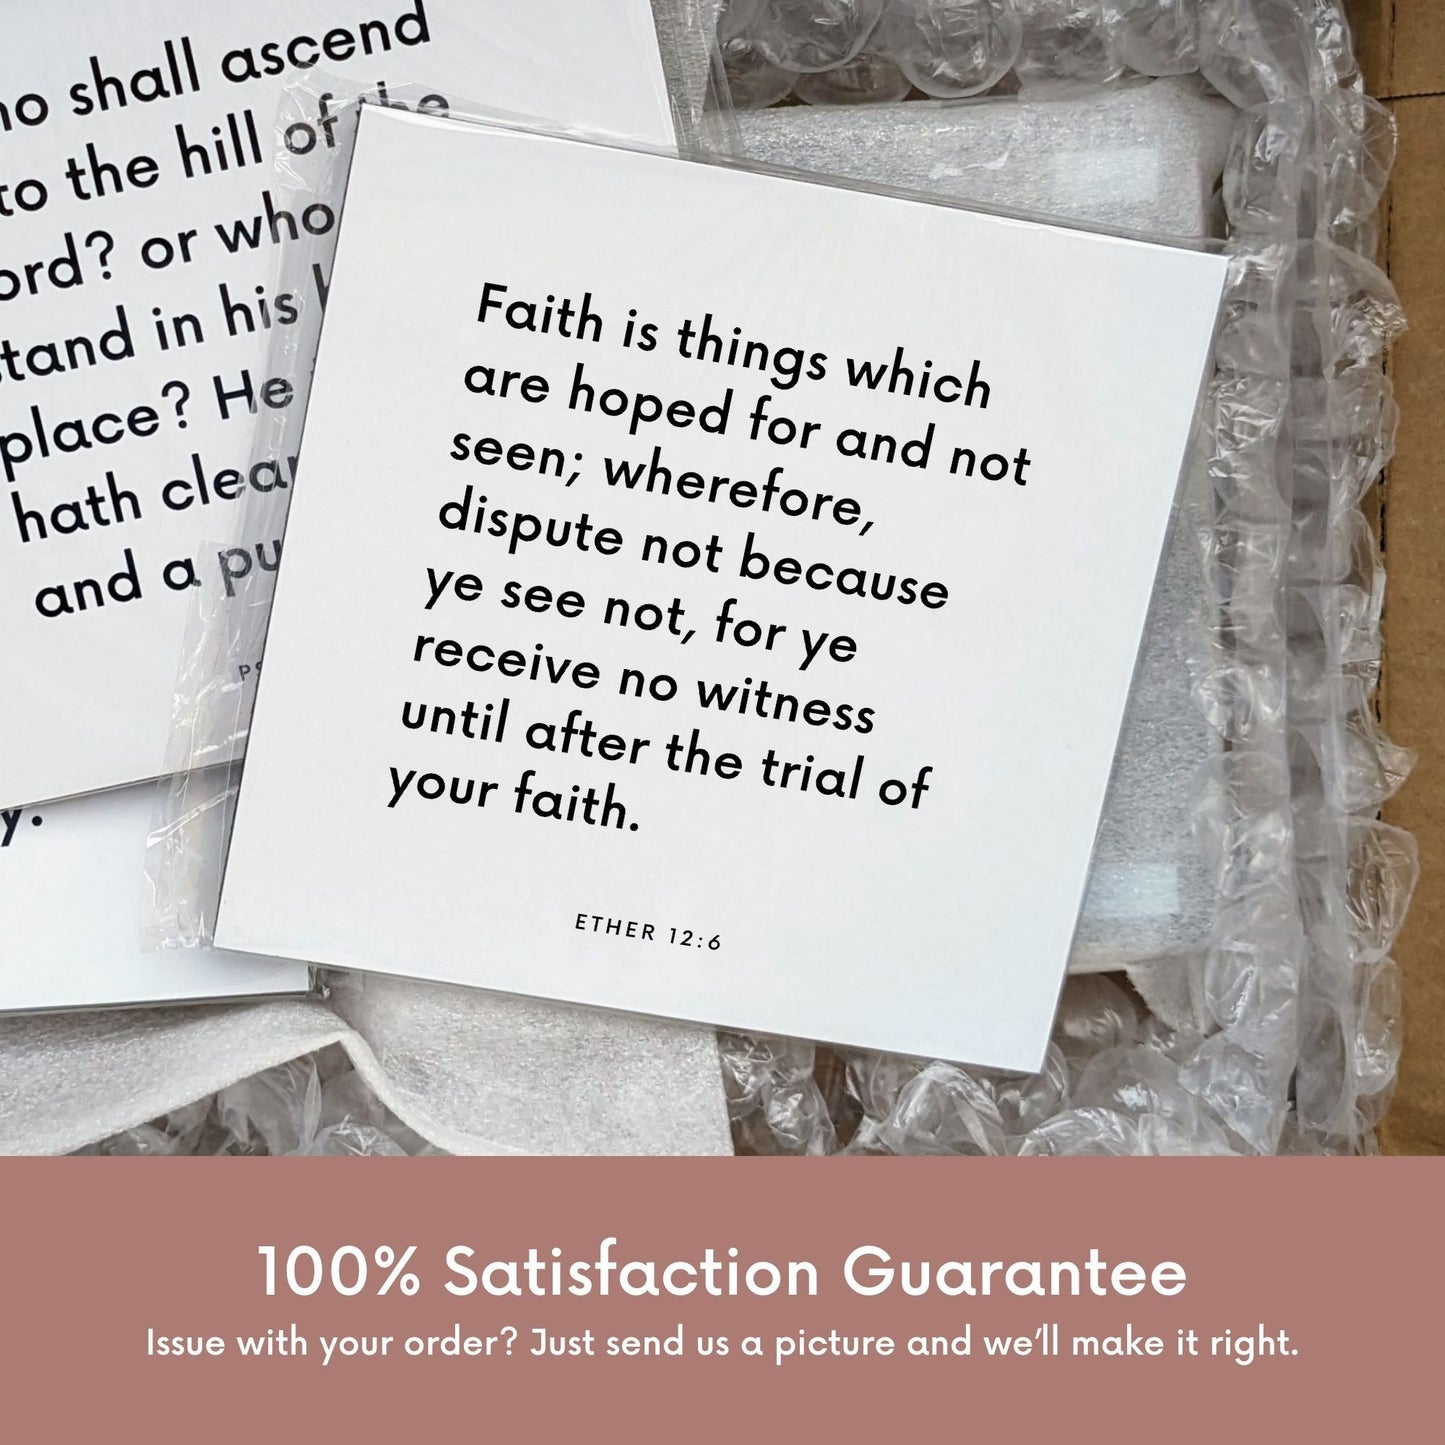 Shipping materials for scripture tile of Ether 12:6 - "Faith is things which are hoped for and not seen"